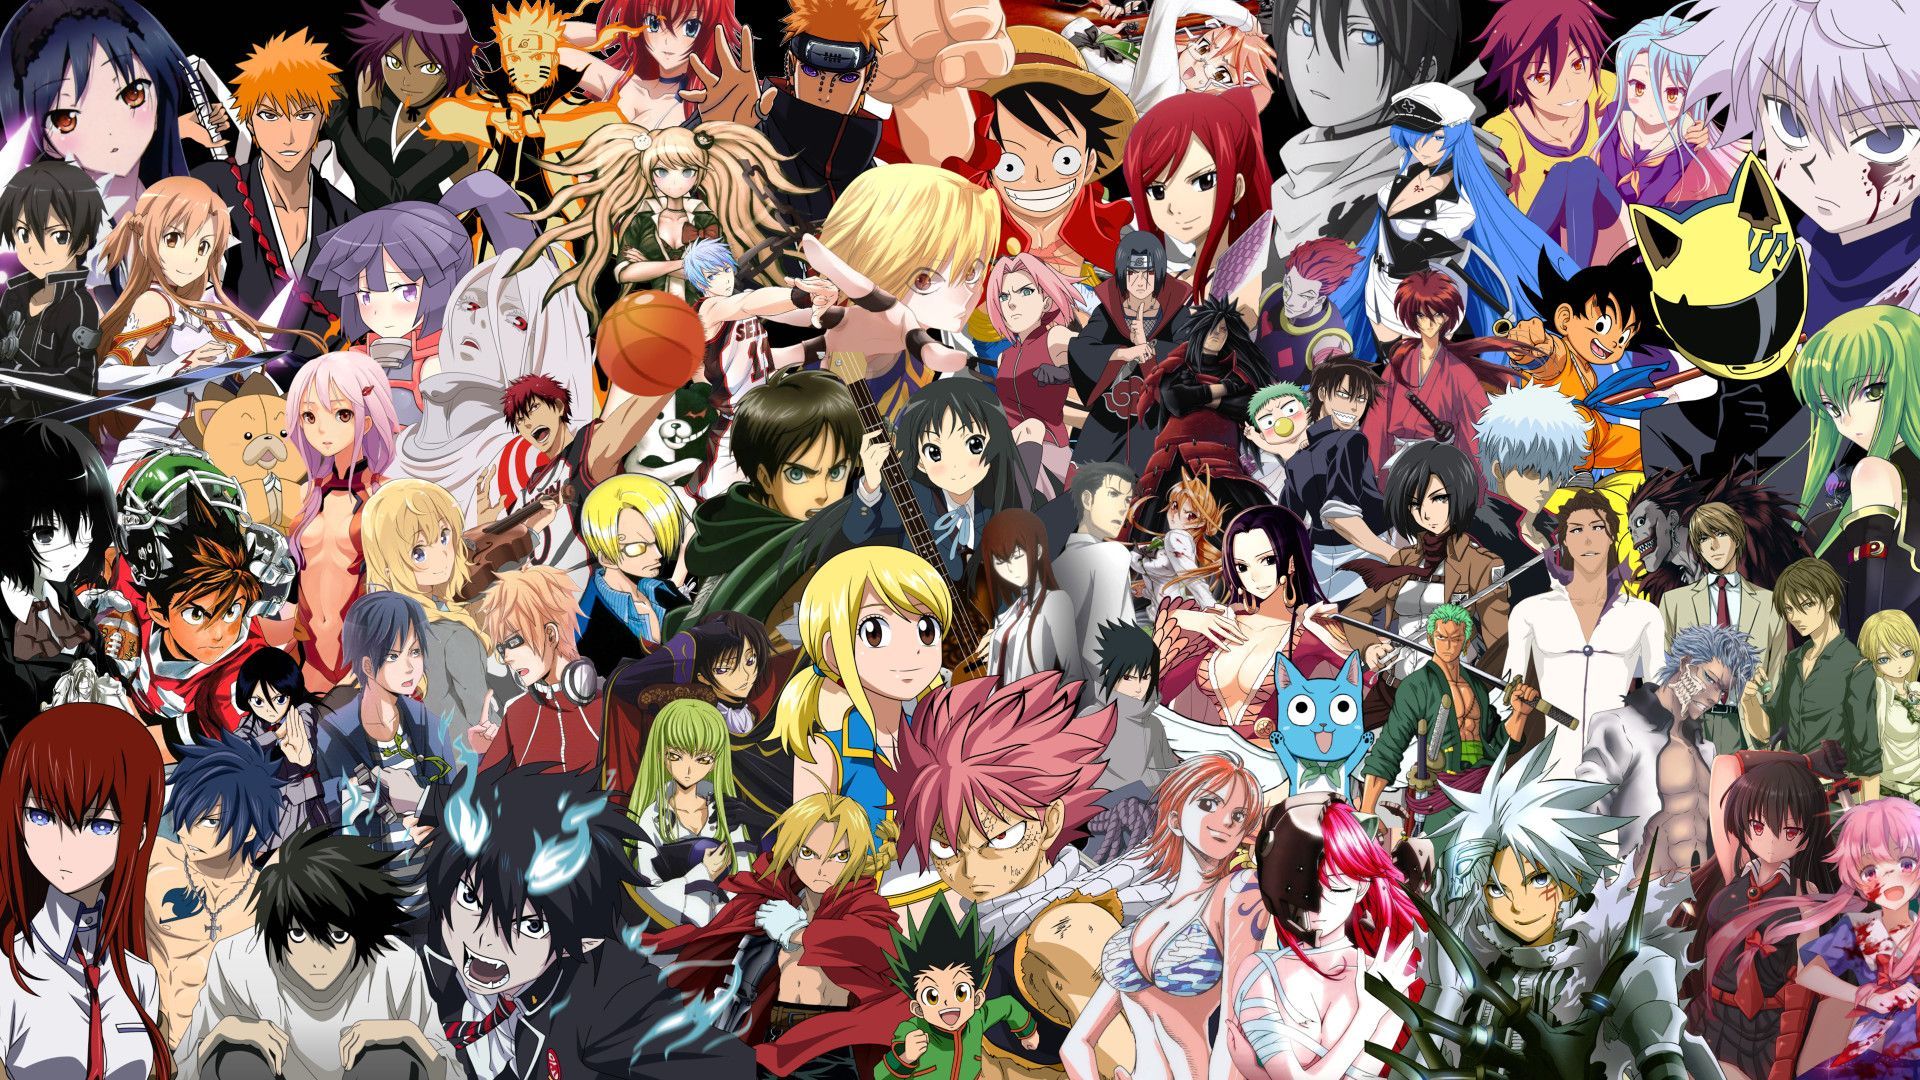 Background Naruto Characters Wallpaper. Anime wallpaper, All anime characters, Cool anime wallpaper